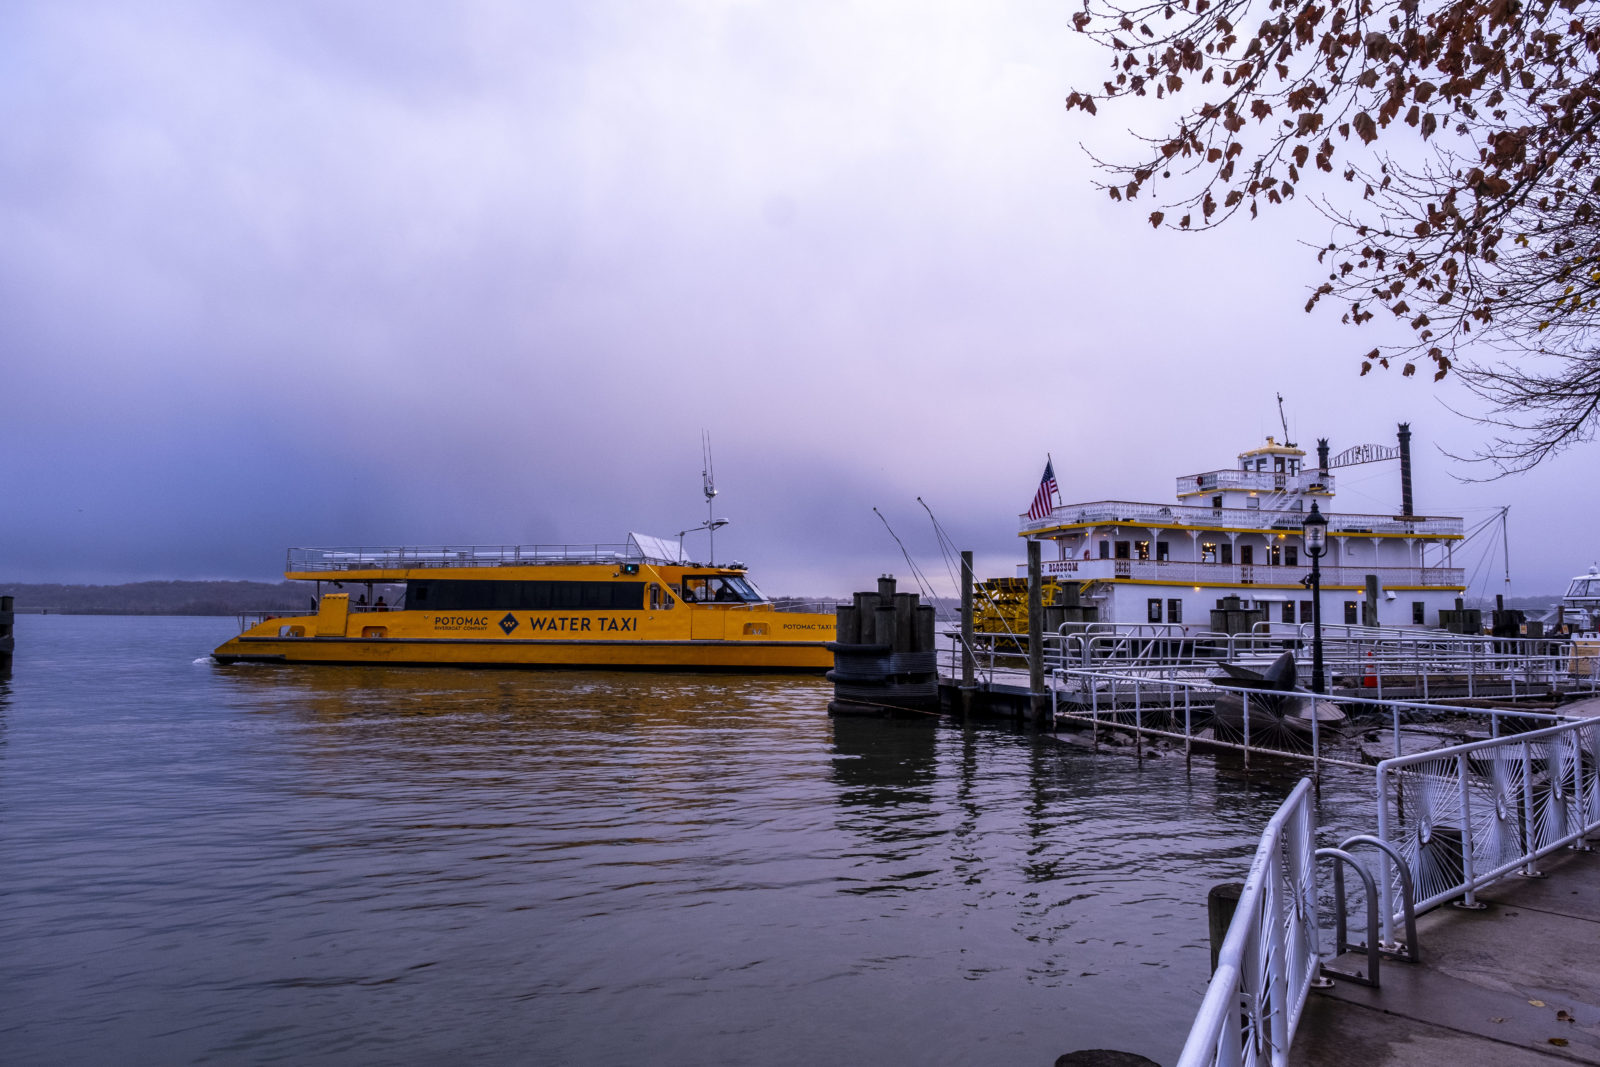 Just in time for the cherry blossoms, the water taxi returns to Alexandria ALXnow